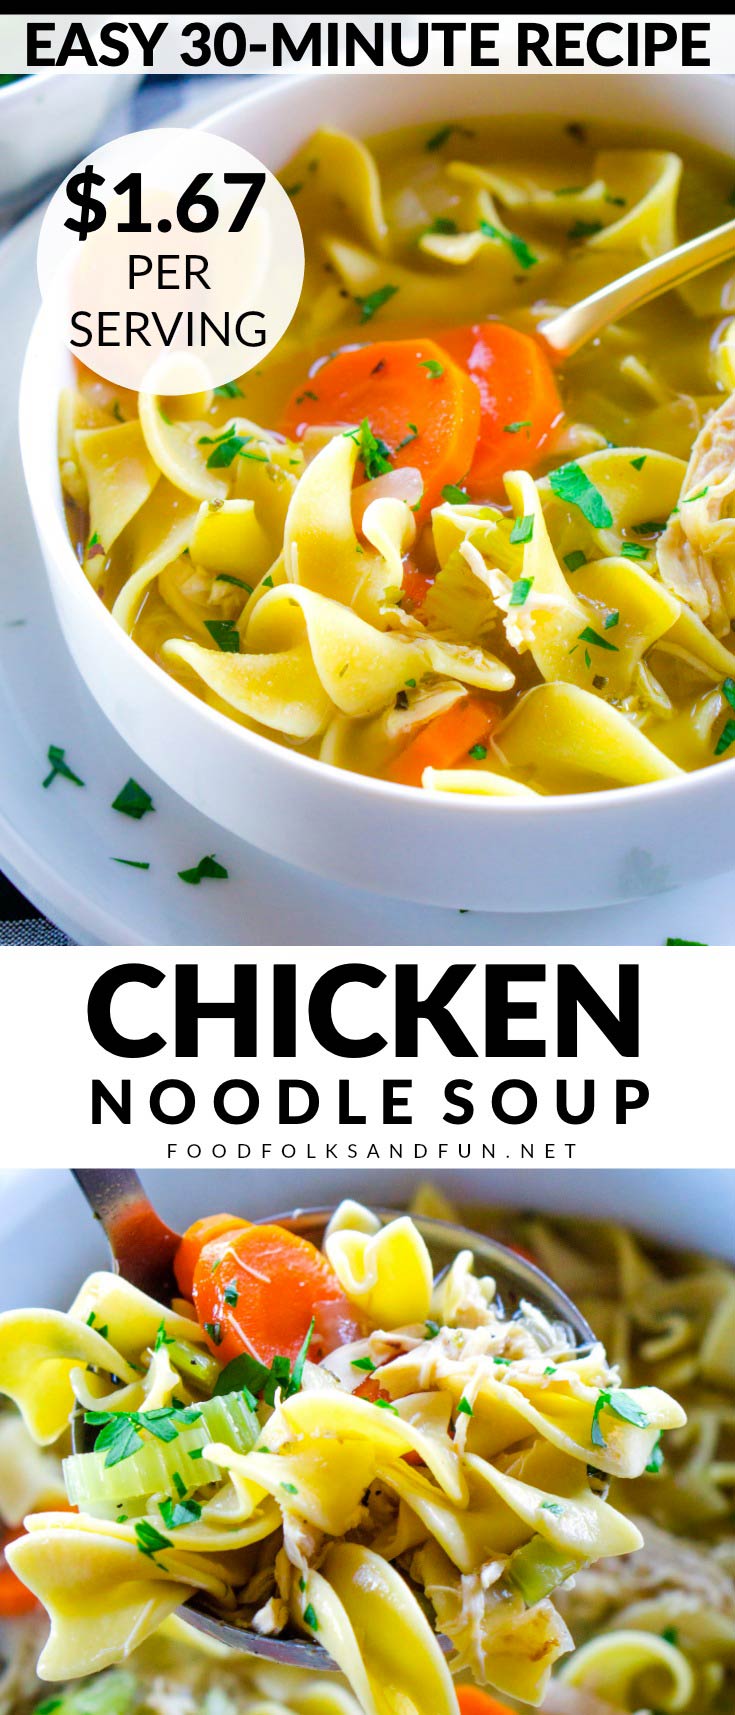 Picture collage of rotisserie chicken noodle soup with text overlay for Pinterest.